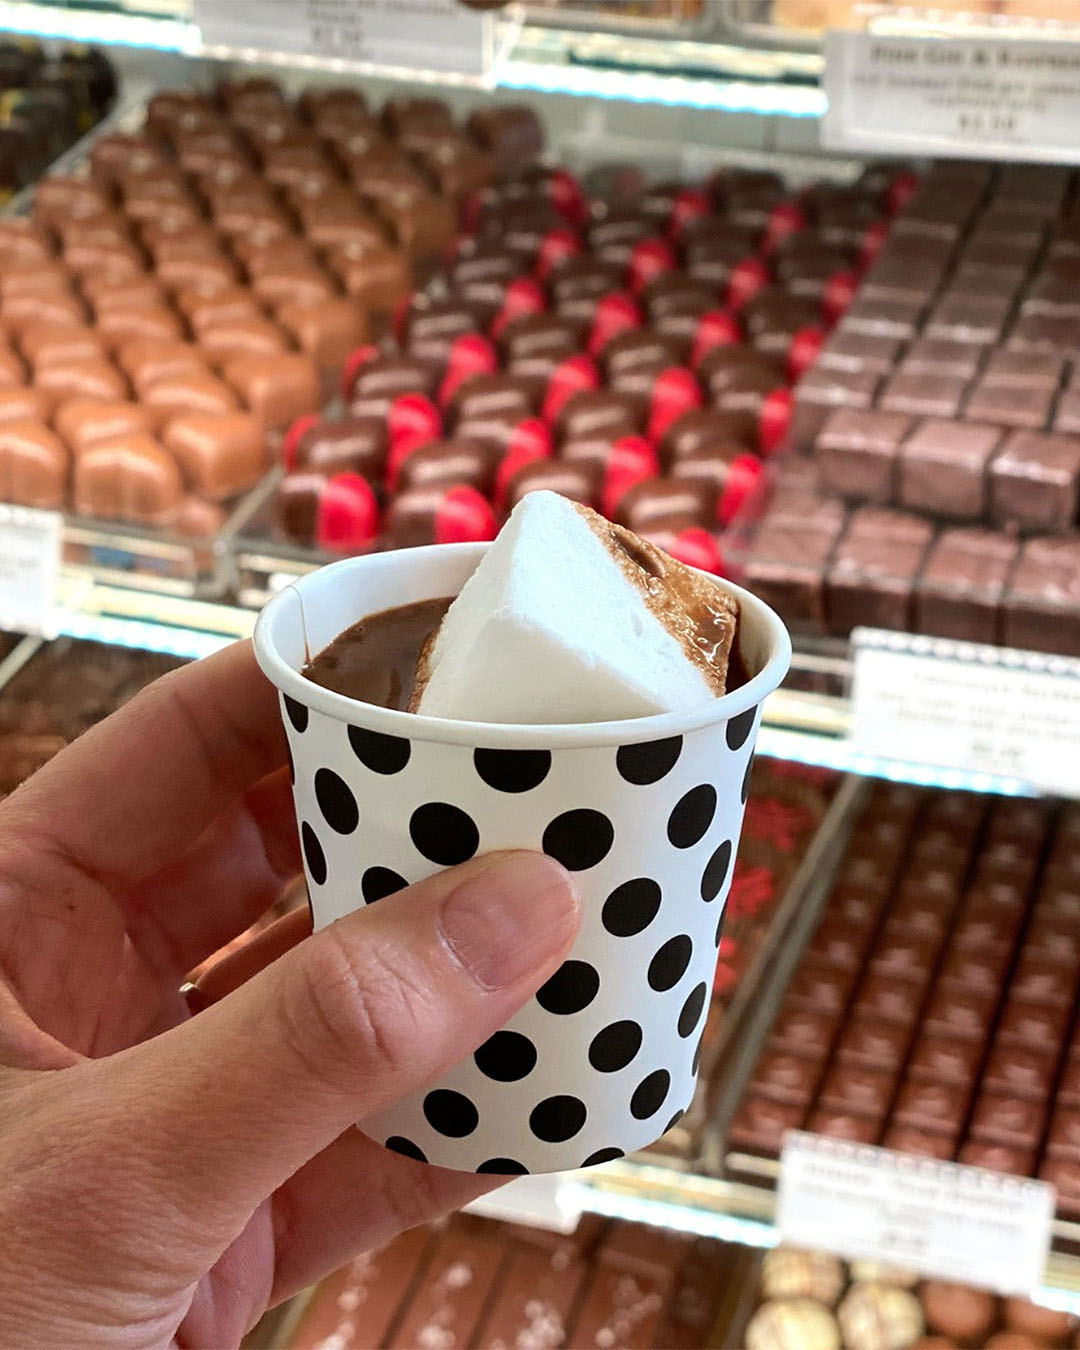 A hot chocolate shot with a vanilla marshmallow is seen in front of rows of handmade chocolates at Devonport Chocolates.